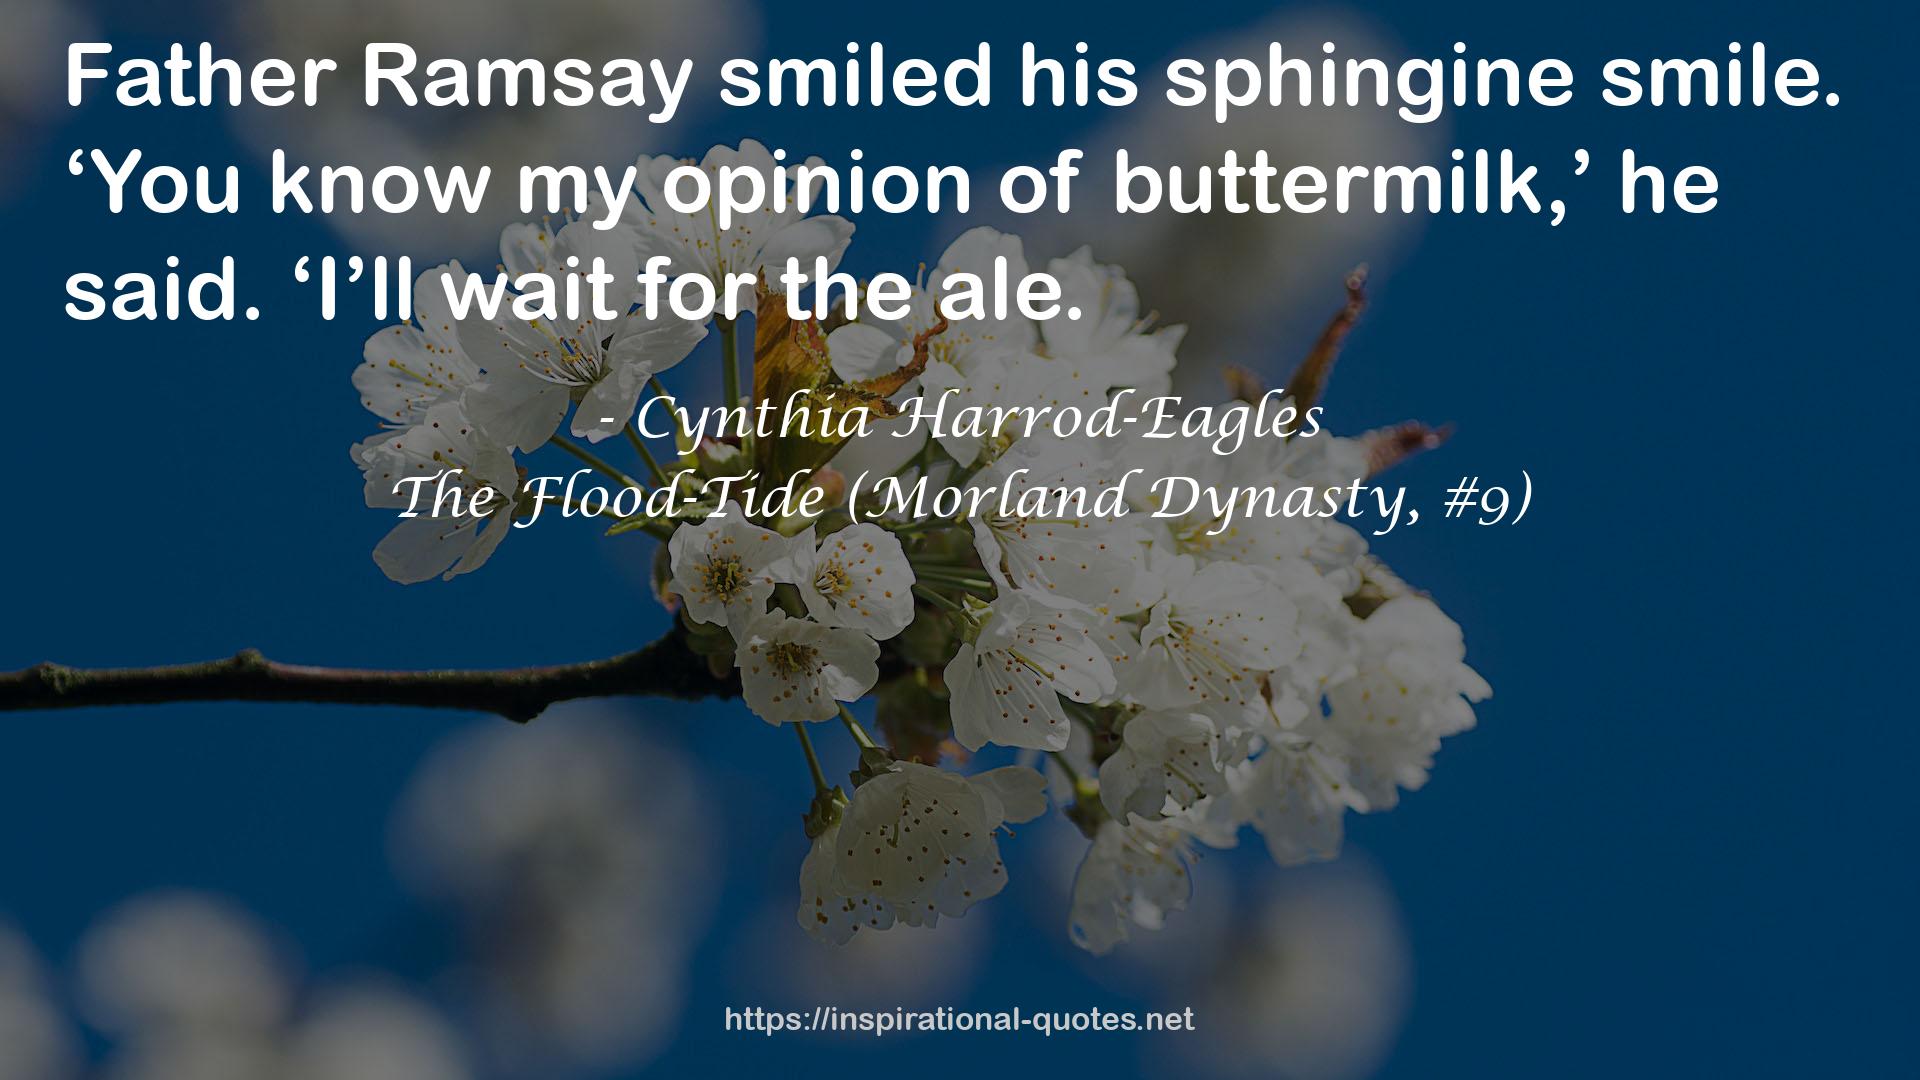 The Flood-Tide (Morland Dynasty, #9) QUOTES